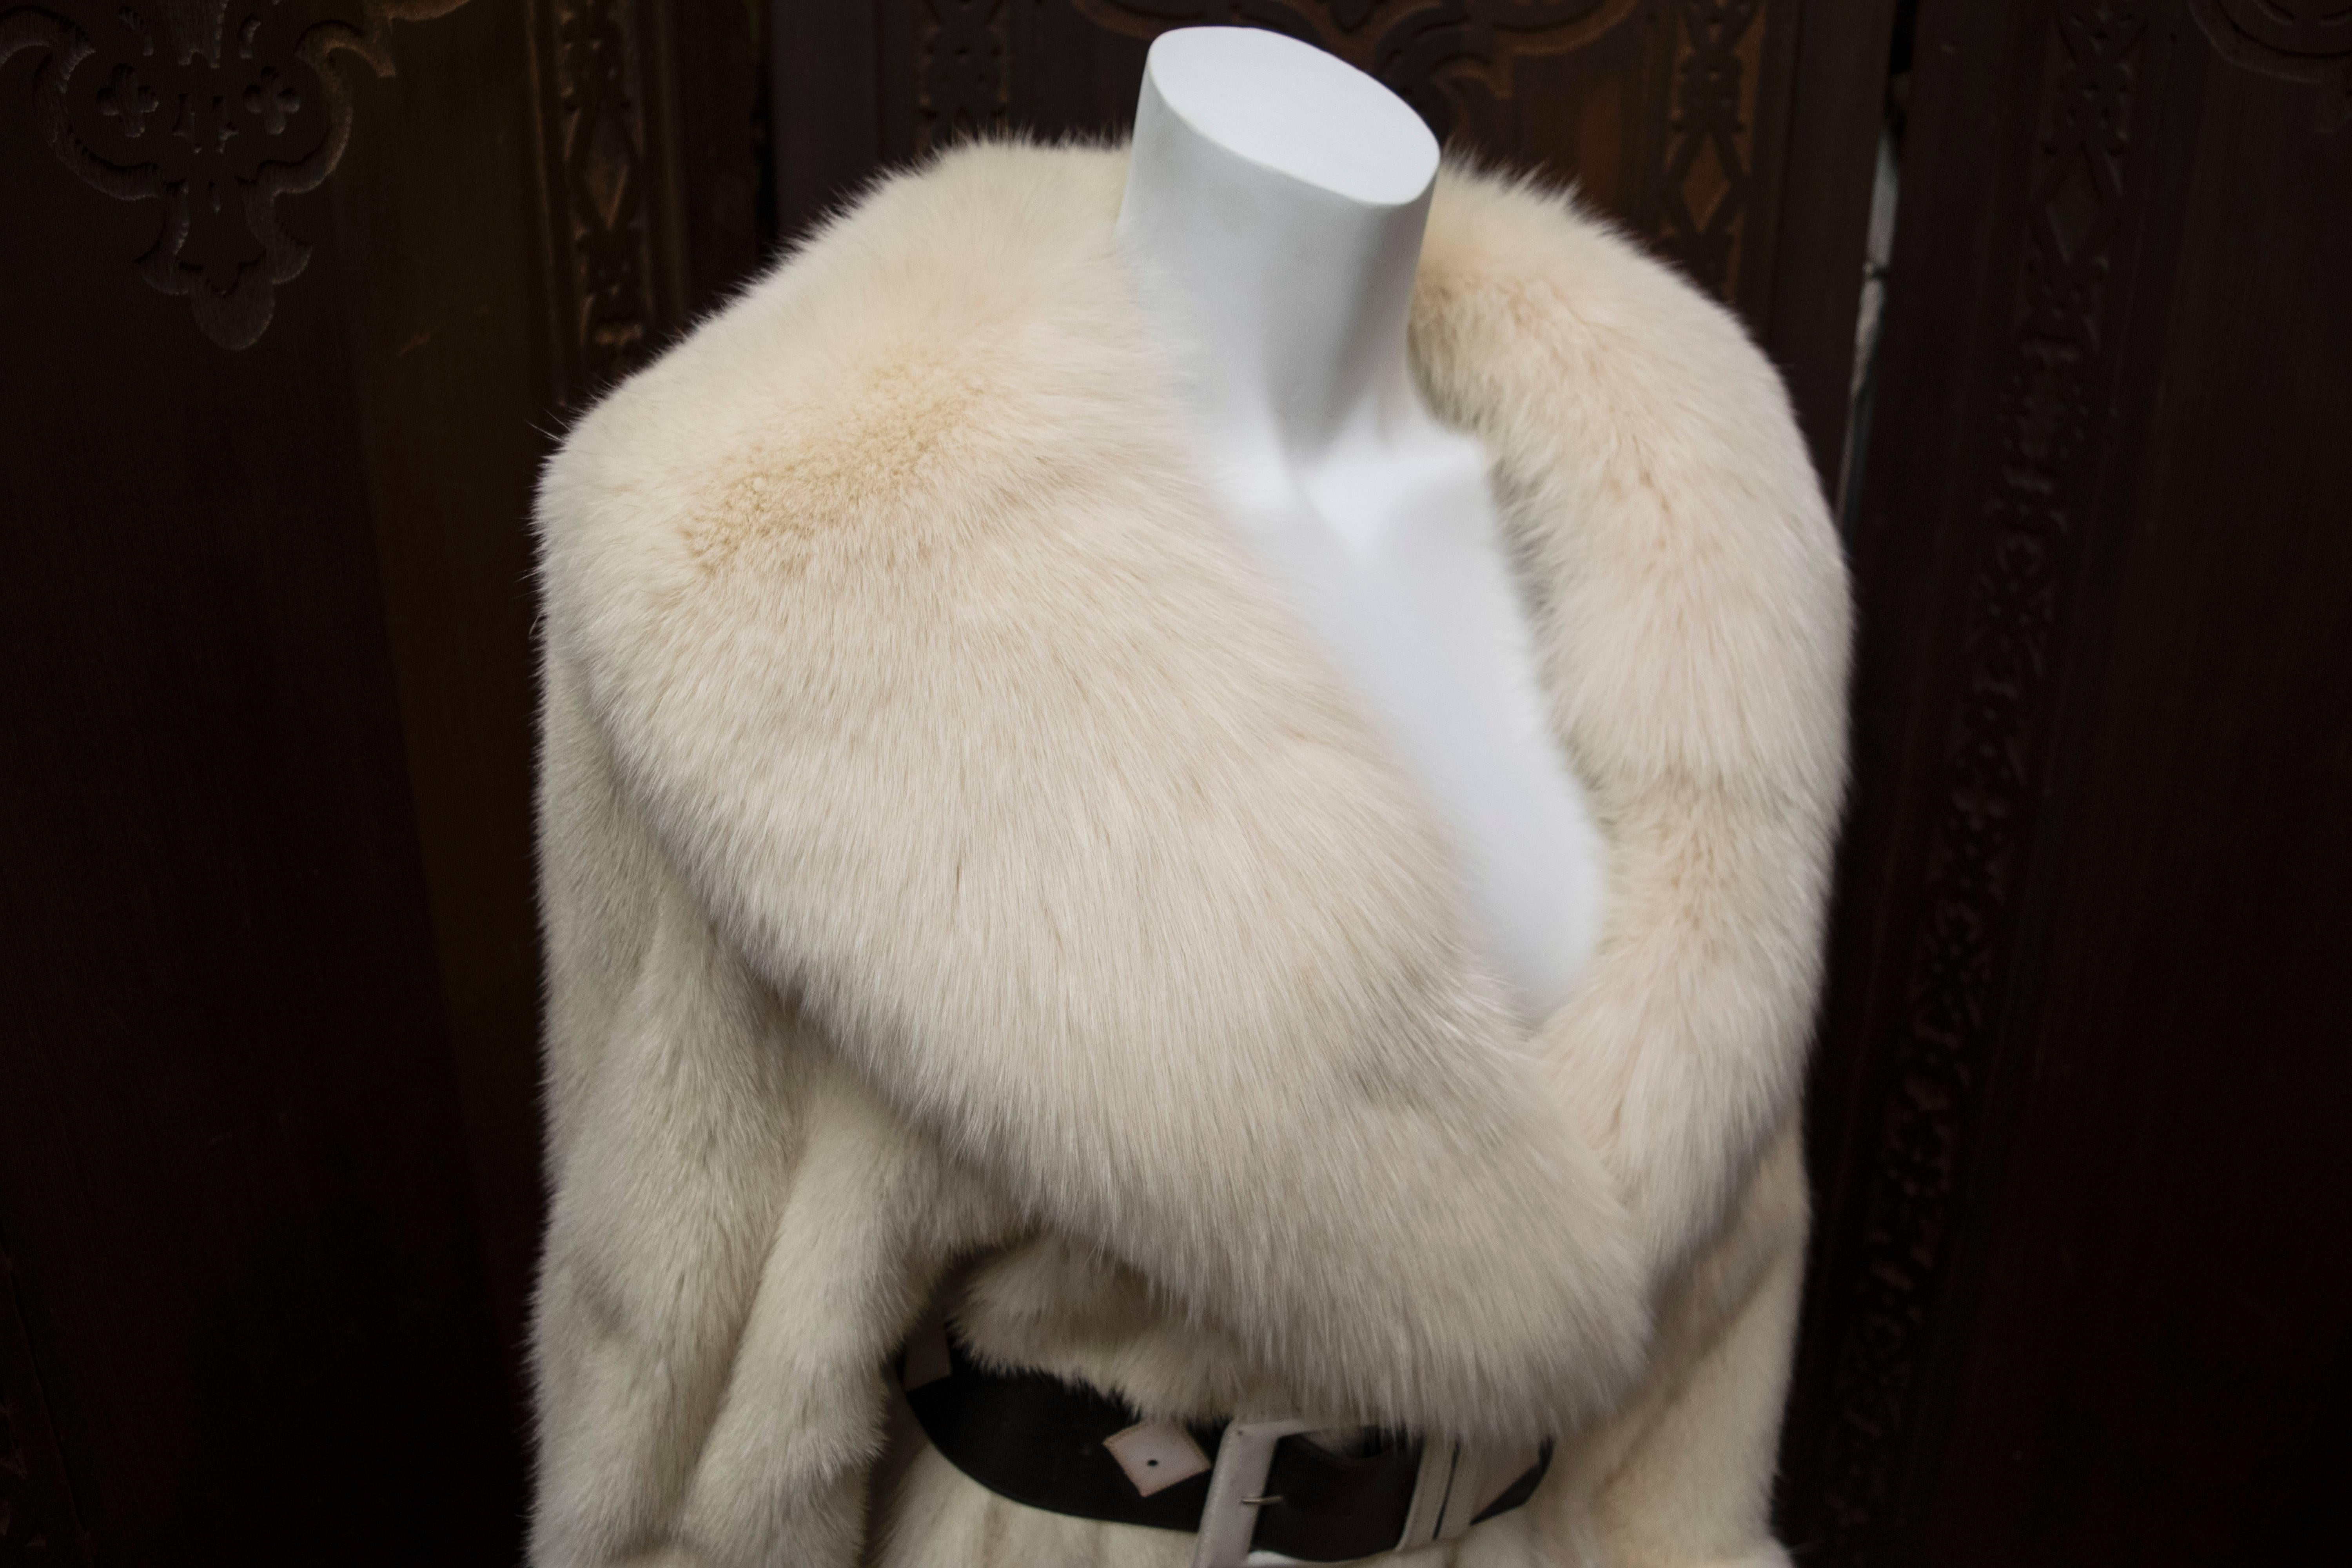 Stunning Christian Dior Fourrure Fox Trimmed White Mink Fur Coat. 
A luxurious long white mink fur coat trimmed with exquisitely plush white fox fur. Shown belted for styling; Belt can be purchased. 

B 40
W 40
H 44
L 50